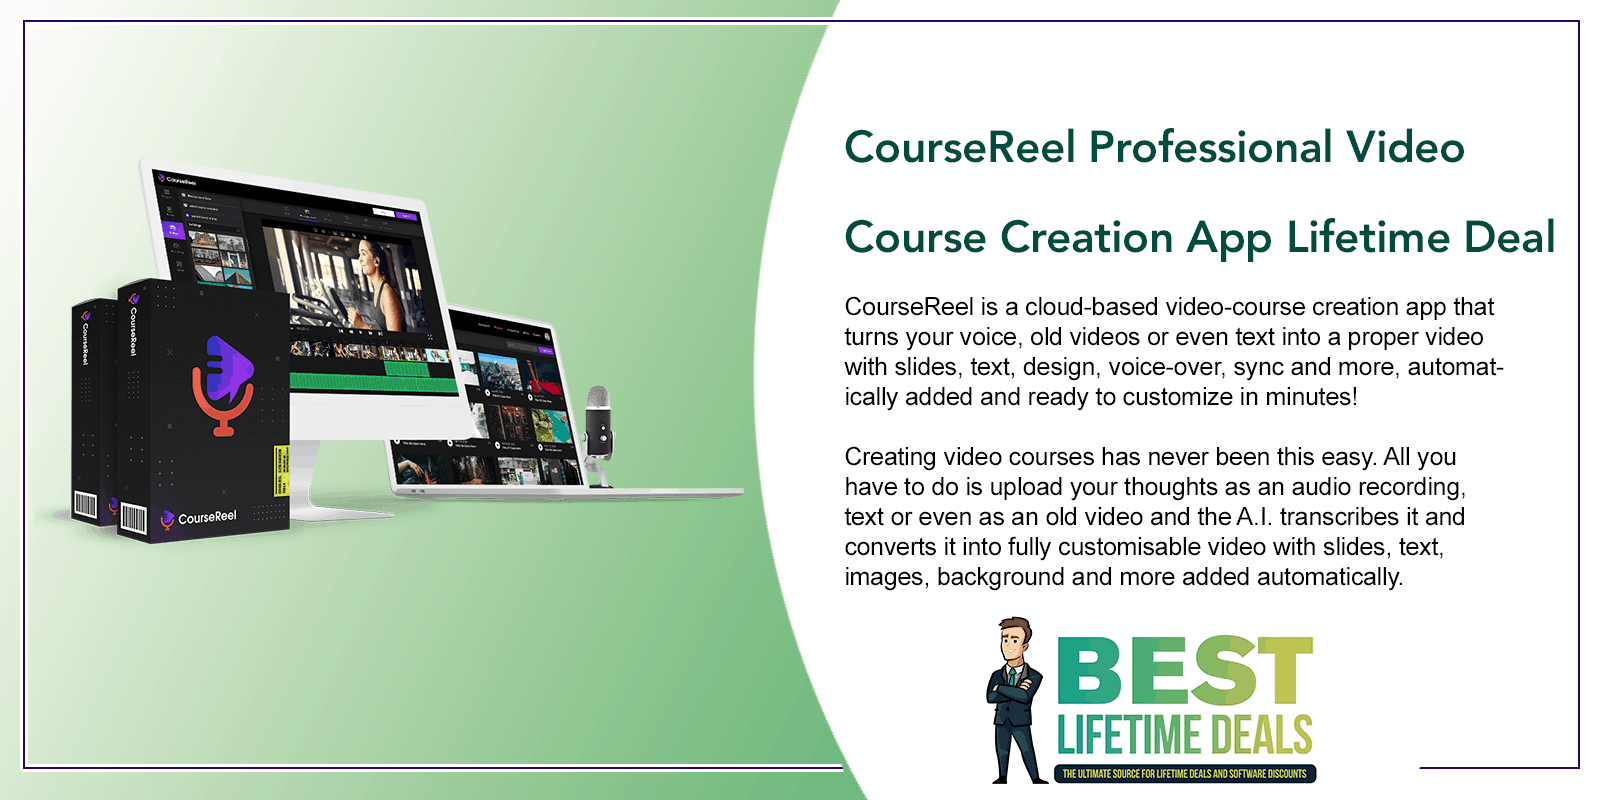 CourseReel Professional Video Course Creation App Featured Image